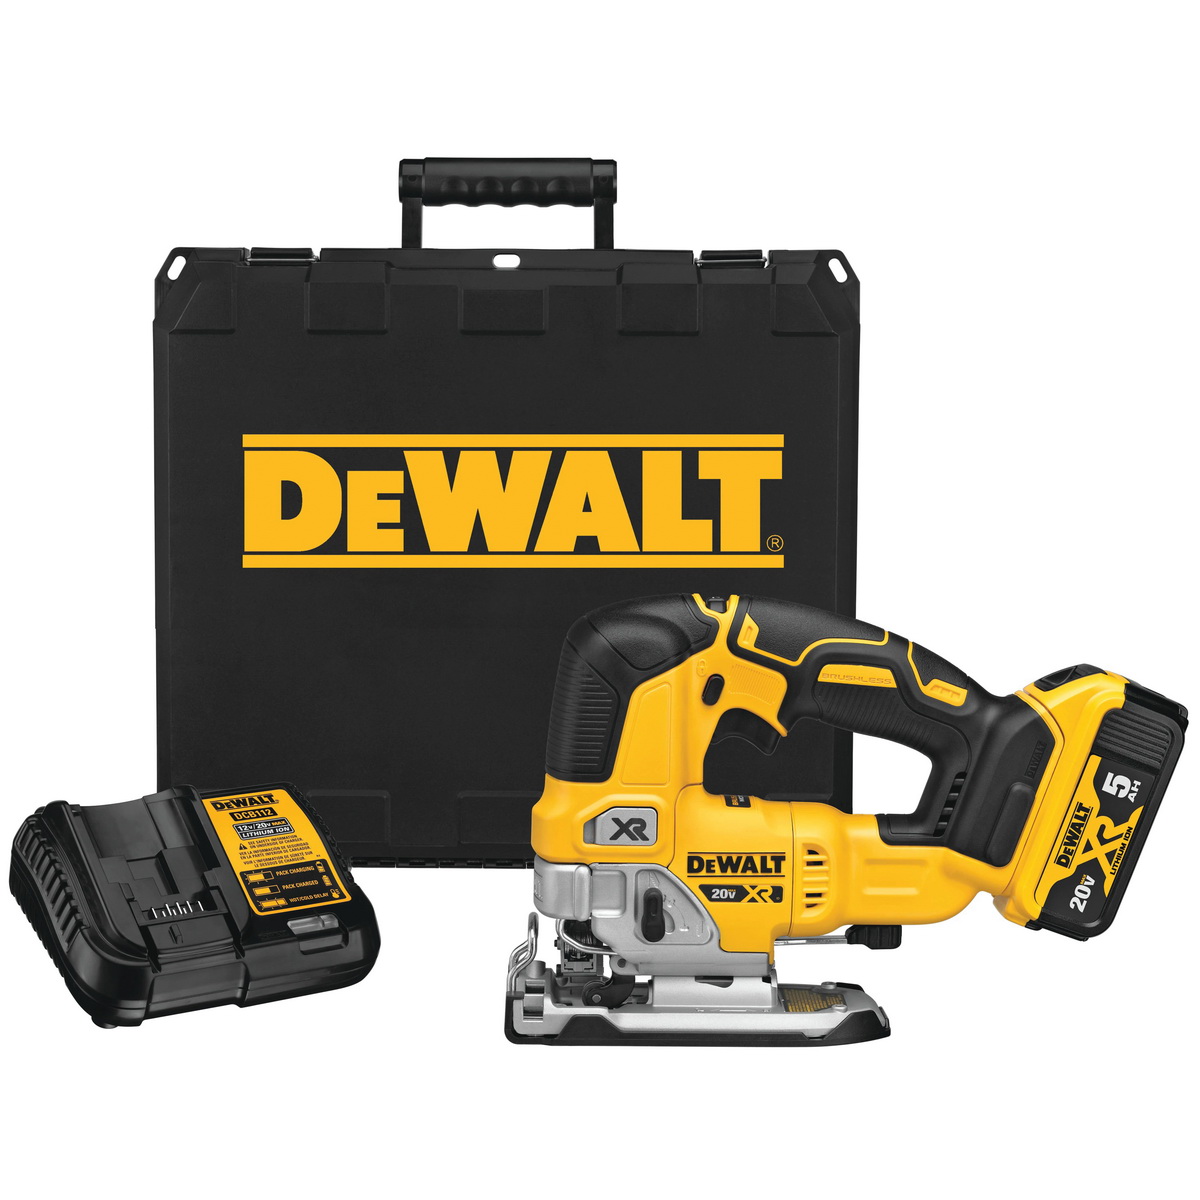 DeWALT DCS334P1 Jig Saw Kit, Battery Included, 20 V, 5 Ah, 3/8 in Cutting Capacity, 1 in L Stroke, 0 to 3200 spm